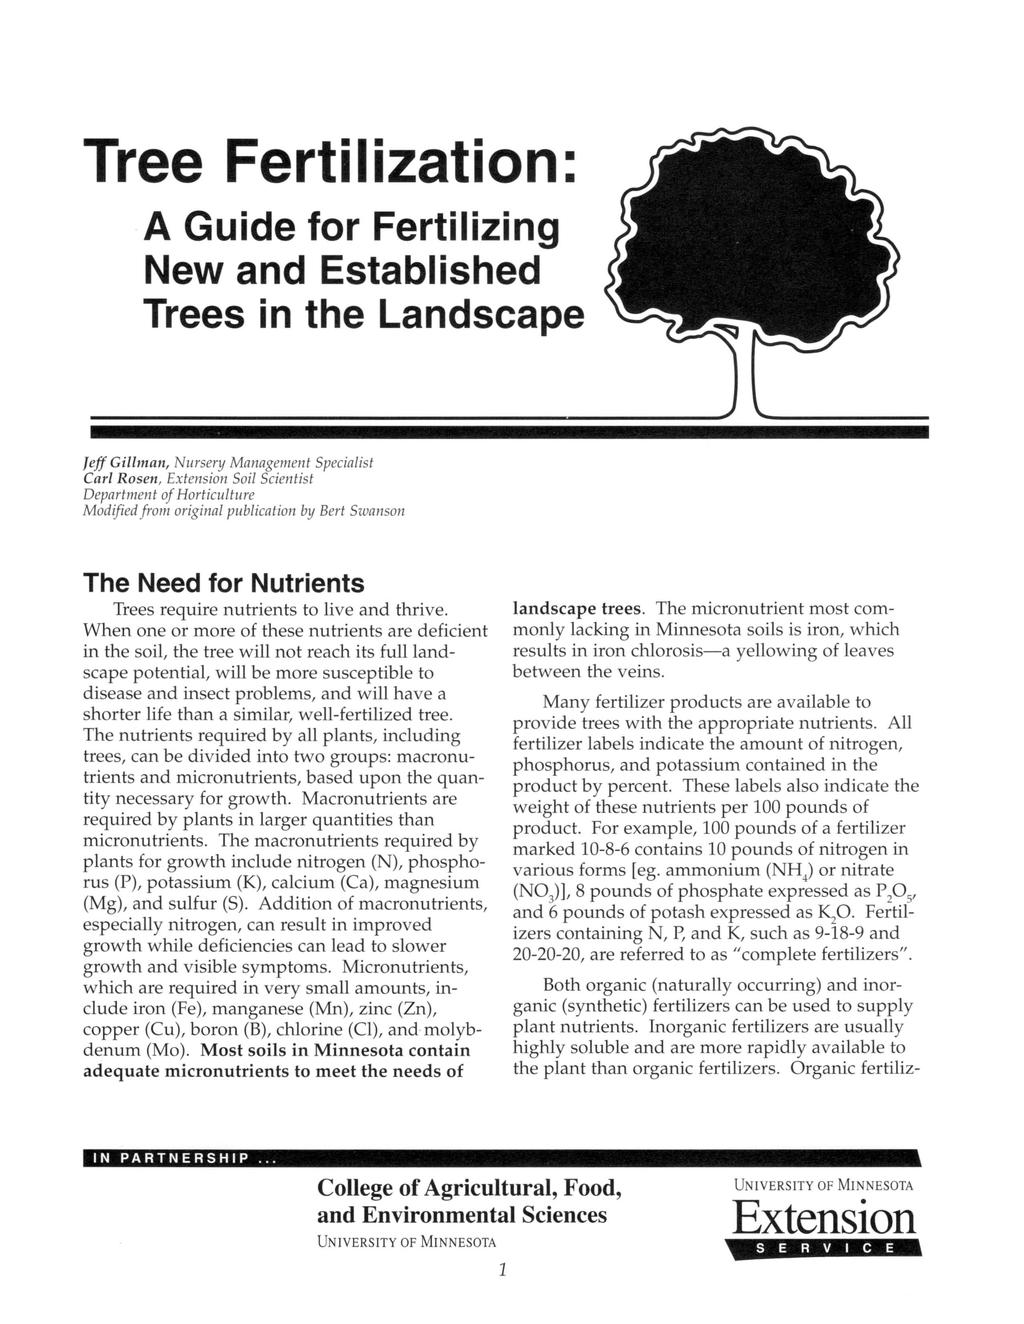 Tree Fertilization: A Guide for Fertilizing New and Established Trees in the Landscape Jeff Gillman, Nursery Management Specialist Carl Rosen, Extension Soil Scientist Department of Horticulture